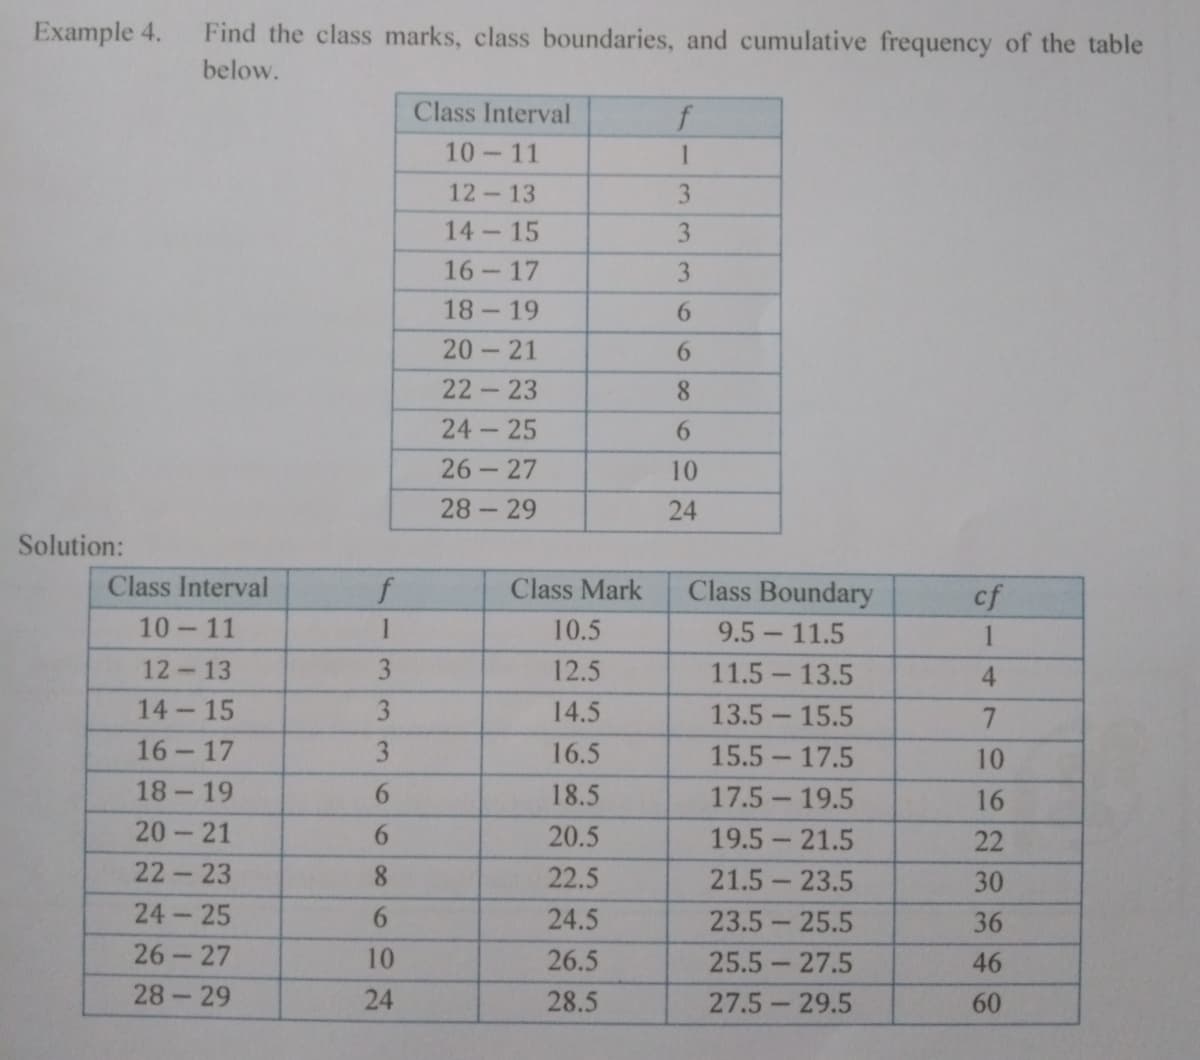 Example 4.
Find the class marks, class boundaries, and cumulative frequency of the table
below.
Class Interval
f
10 11
1
12-13
3.
14 15
3
16-17
3
18 -19
6.
20
- 21
22-23
8
24 25
26 27
28 29
6.
10
24
Solution:
Class Interval
Class Boundary
9.5 11.5
11.5 13.5
13.5 15.5
Class Mark
cf
10-11
10.5
1
12-13
3
12.5
4.
14 15
3
14.5
7.
16 - 17
3
16.5
15.5 17.5
10
18- 19
6.
18.5
17.5 19.5
16
20- 21
6.
20.5
19.5 21.5
22
22-23
8.
22.5
21.5- 23.5
30
24-25
24.5
23.5 25.5
36
26-27
10
26.5
25.5 27.5
46
28-29
24
28.5
27.5 29.5
60
